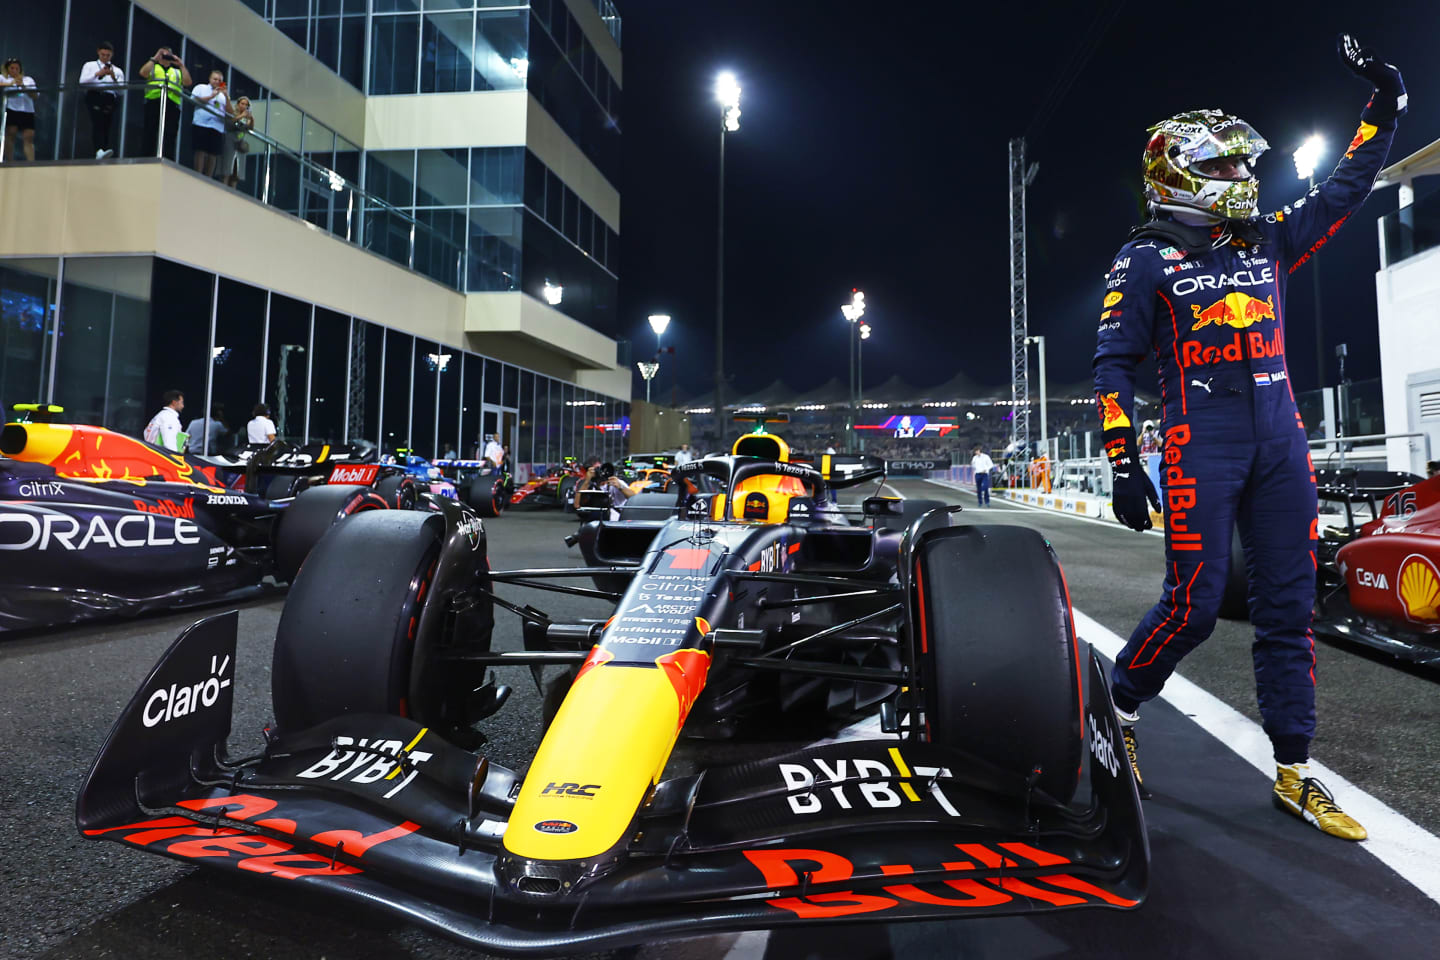 ABU DHABI, UNITED ARAB EMIRATES - NOVEMBER 19: Pole position qualifier Max Verstappen of the Netherlands and Oracle Red Bull Racing celebrates in parc ferme during qualifying ahead of the F1 Grand Prix of Abu Dhabi at Yas Marina Circuit on November 19, 2022 in Abu Dhabi, United Arab Emirates. (Photo by Mark Thompson/Getty Images)